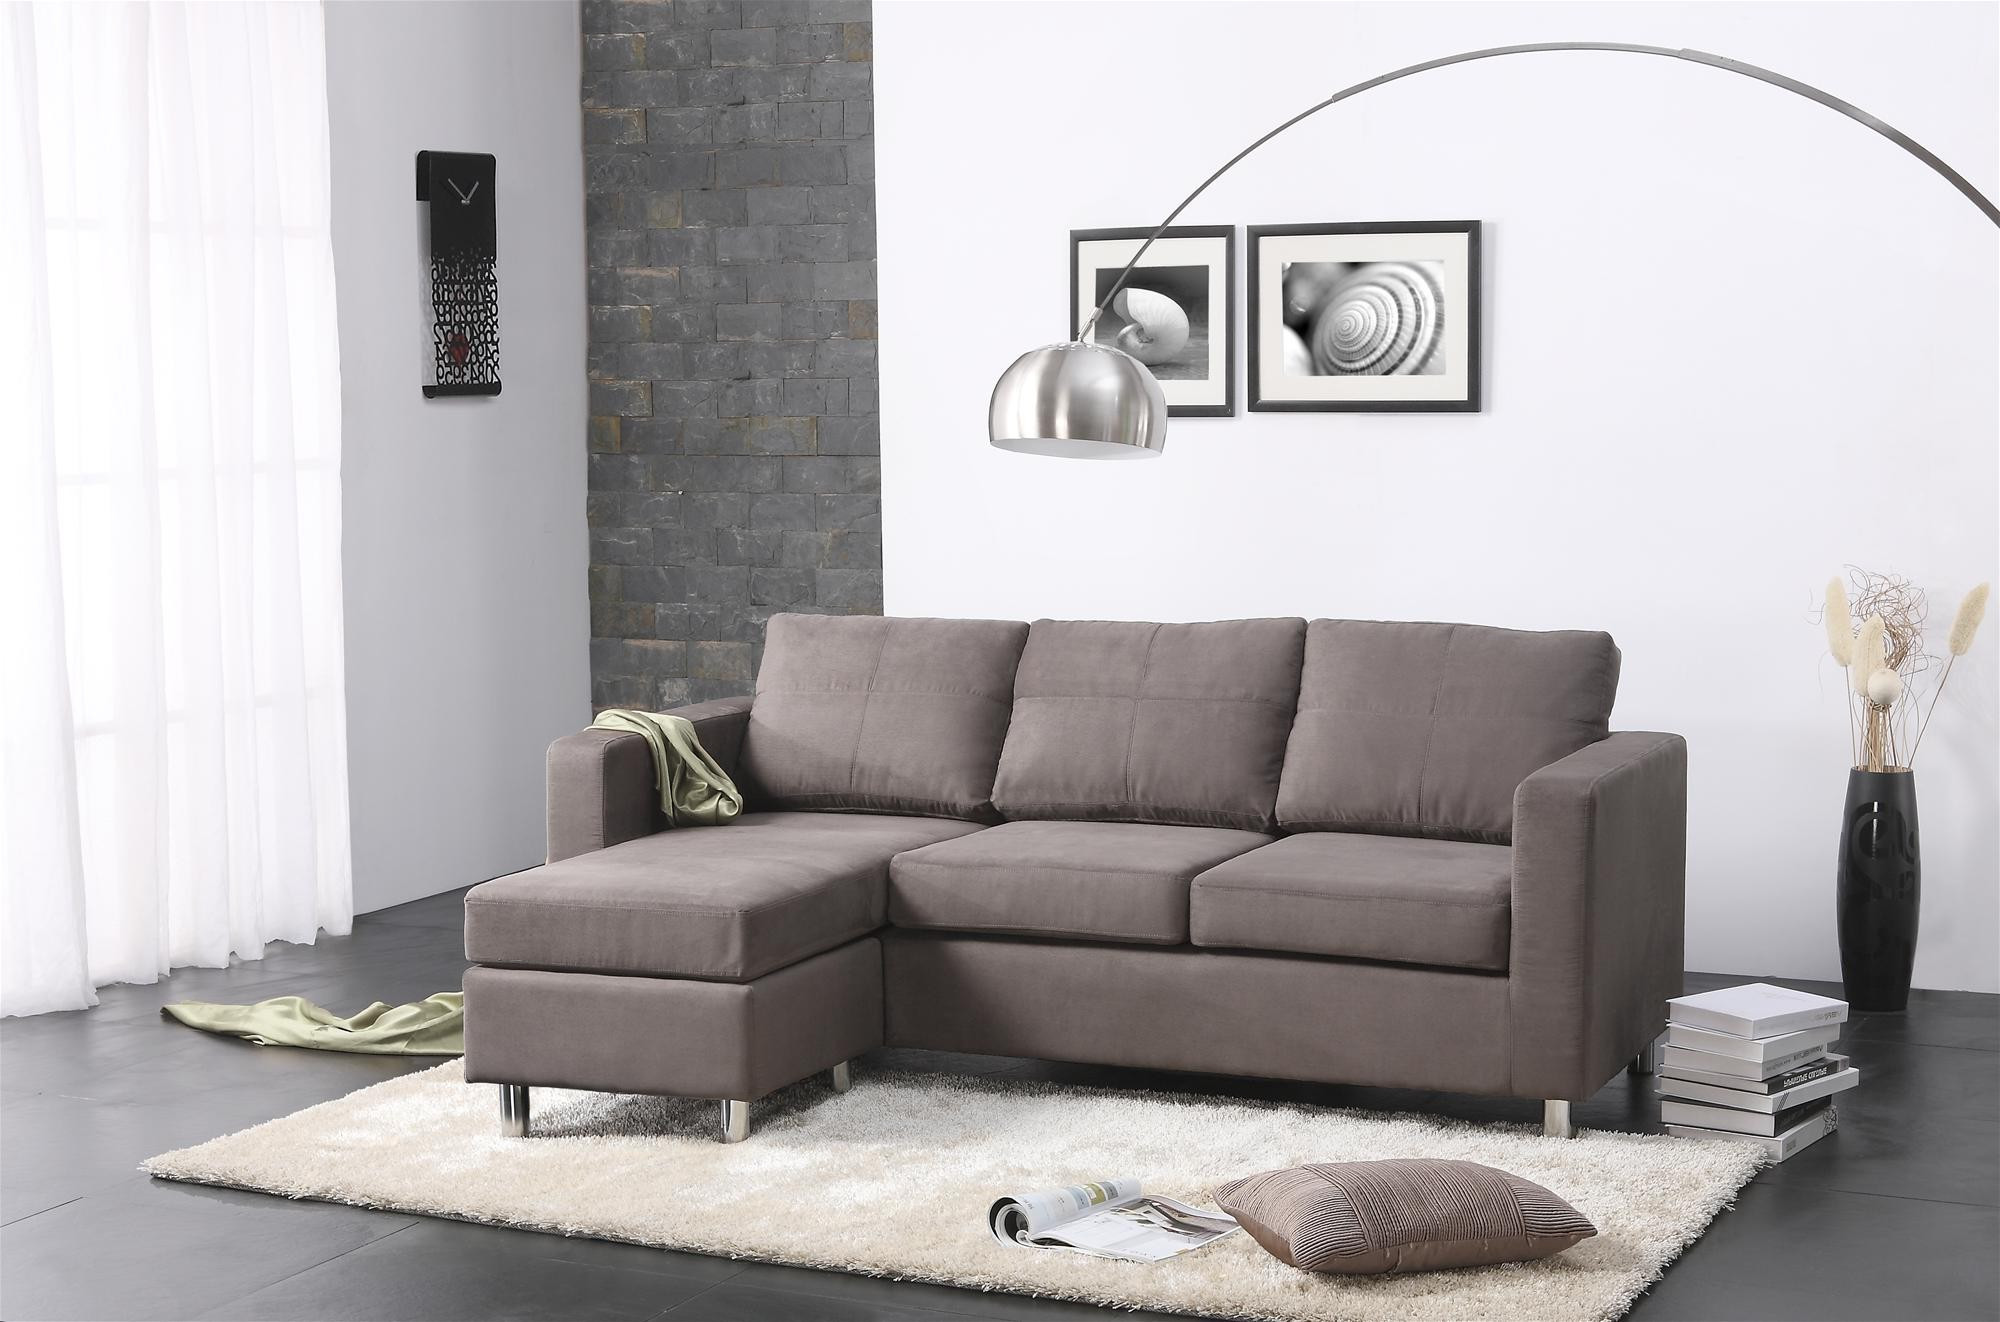 Small Living Room With Sectional
 Living Rooms with Sectionals Sofa for Small Living Room